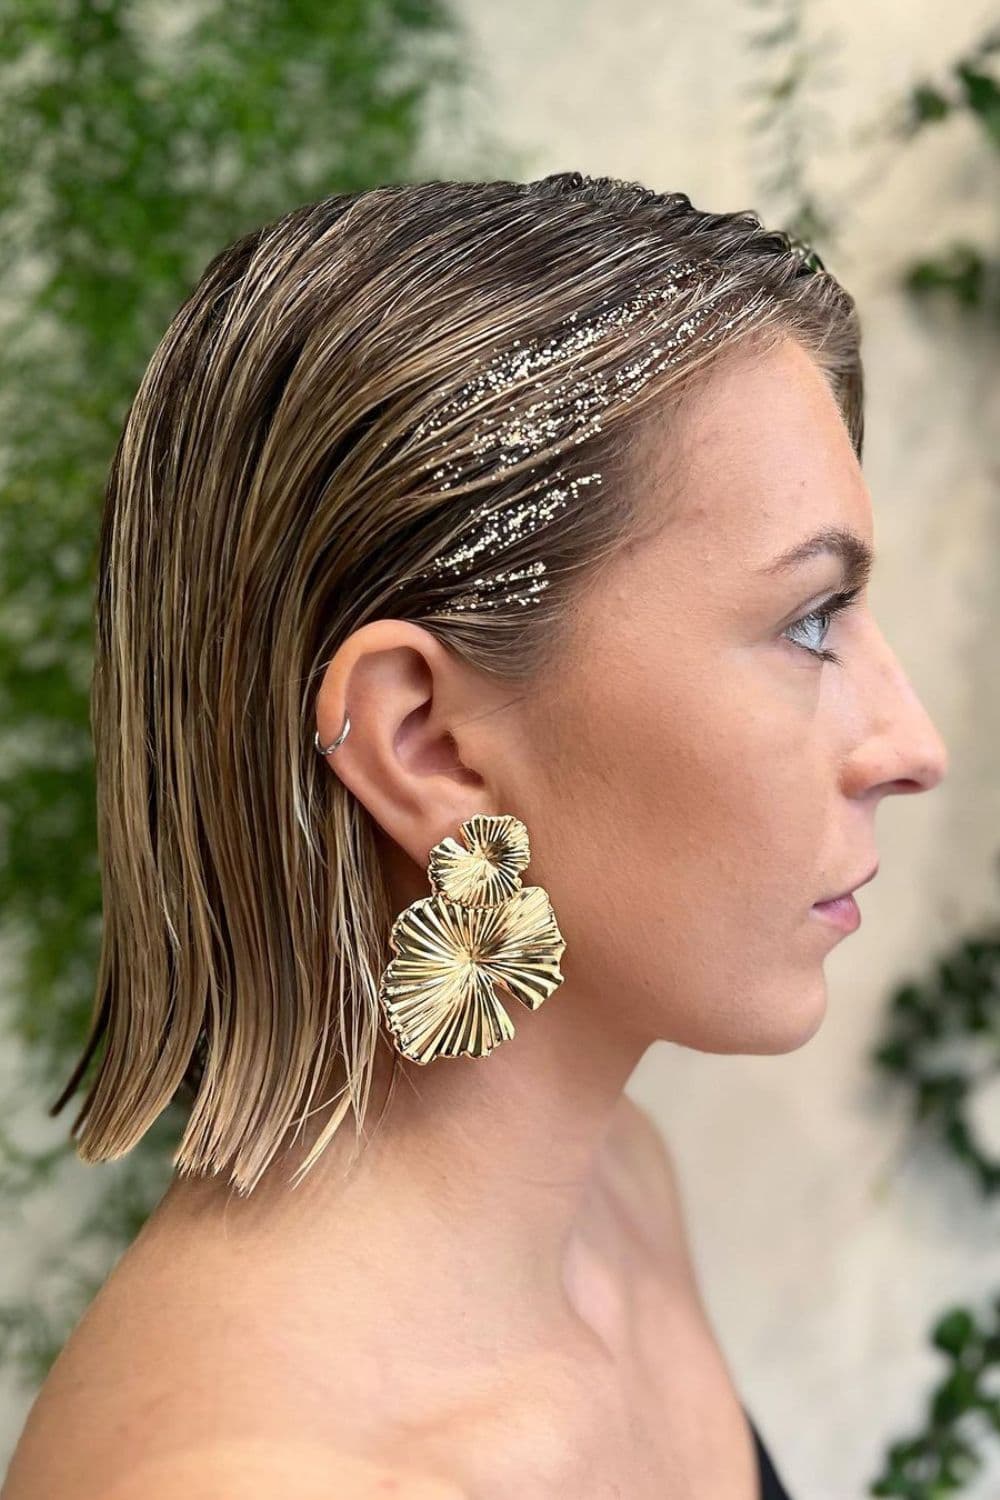 A woman with a short blonde slicked-back wet look with a touch of sparkle.